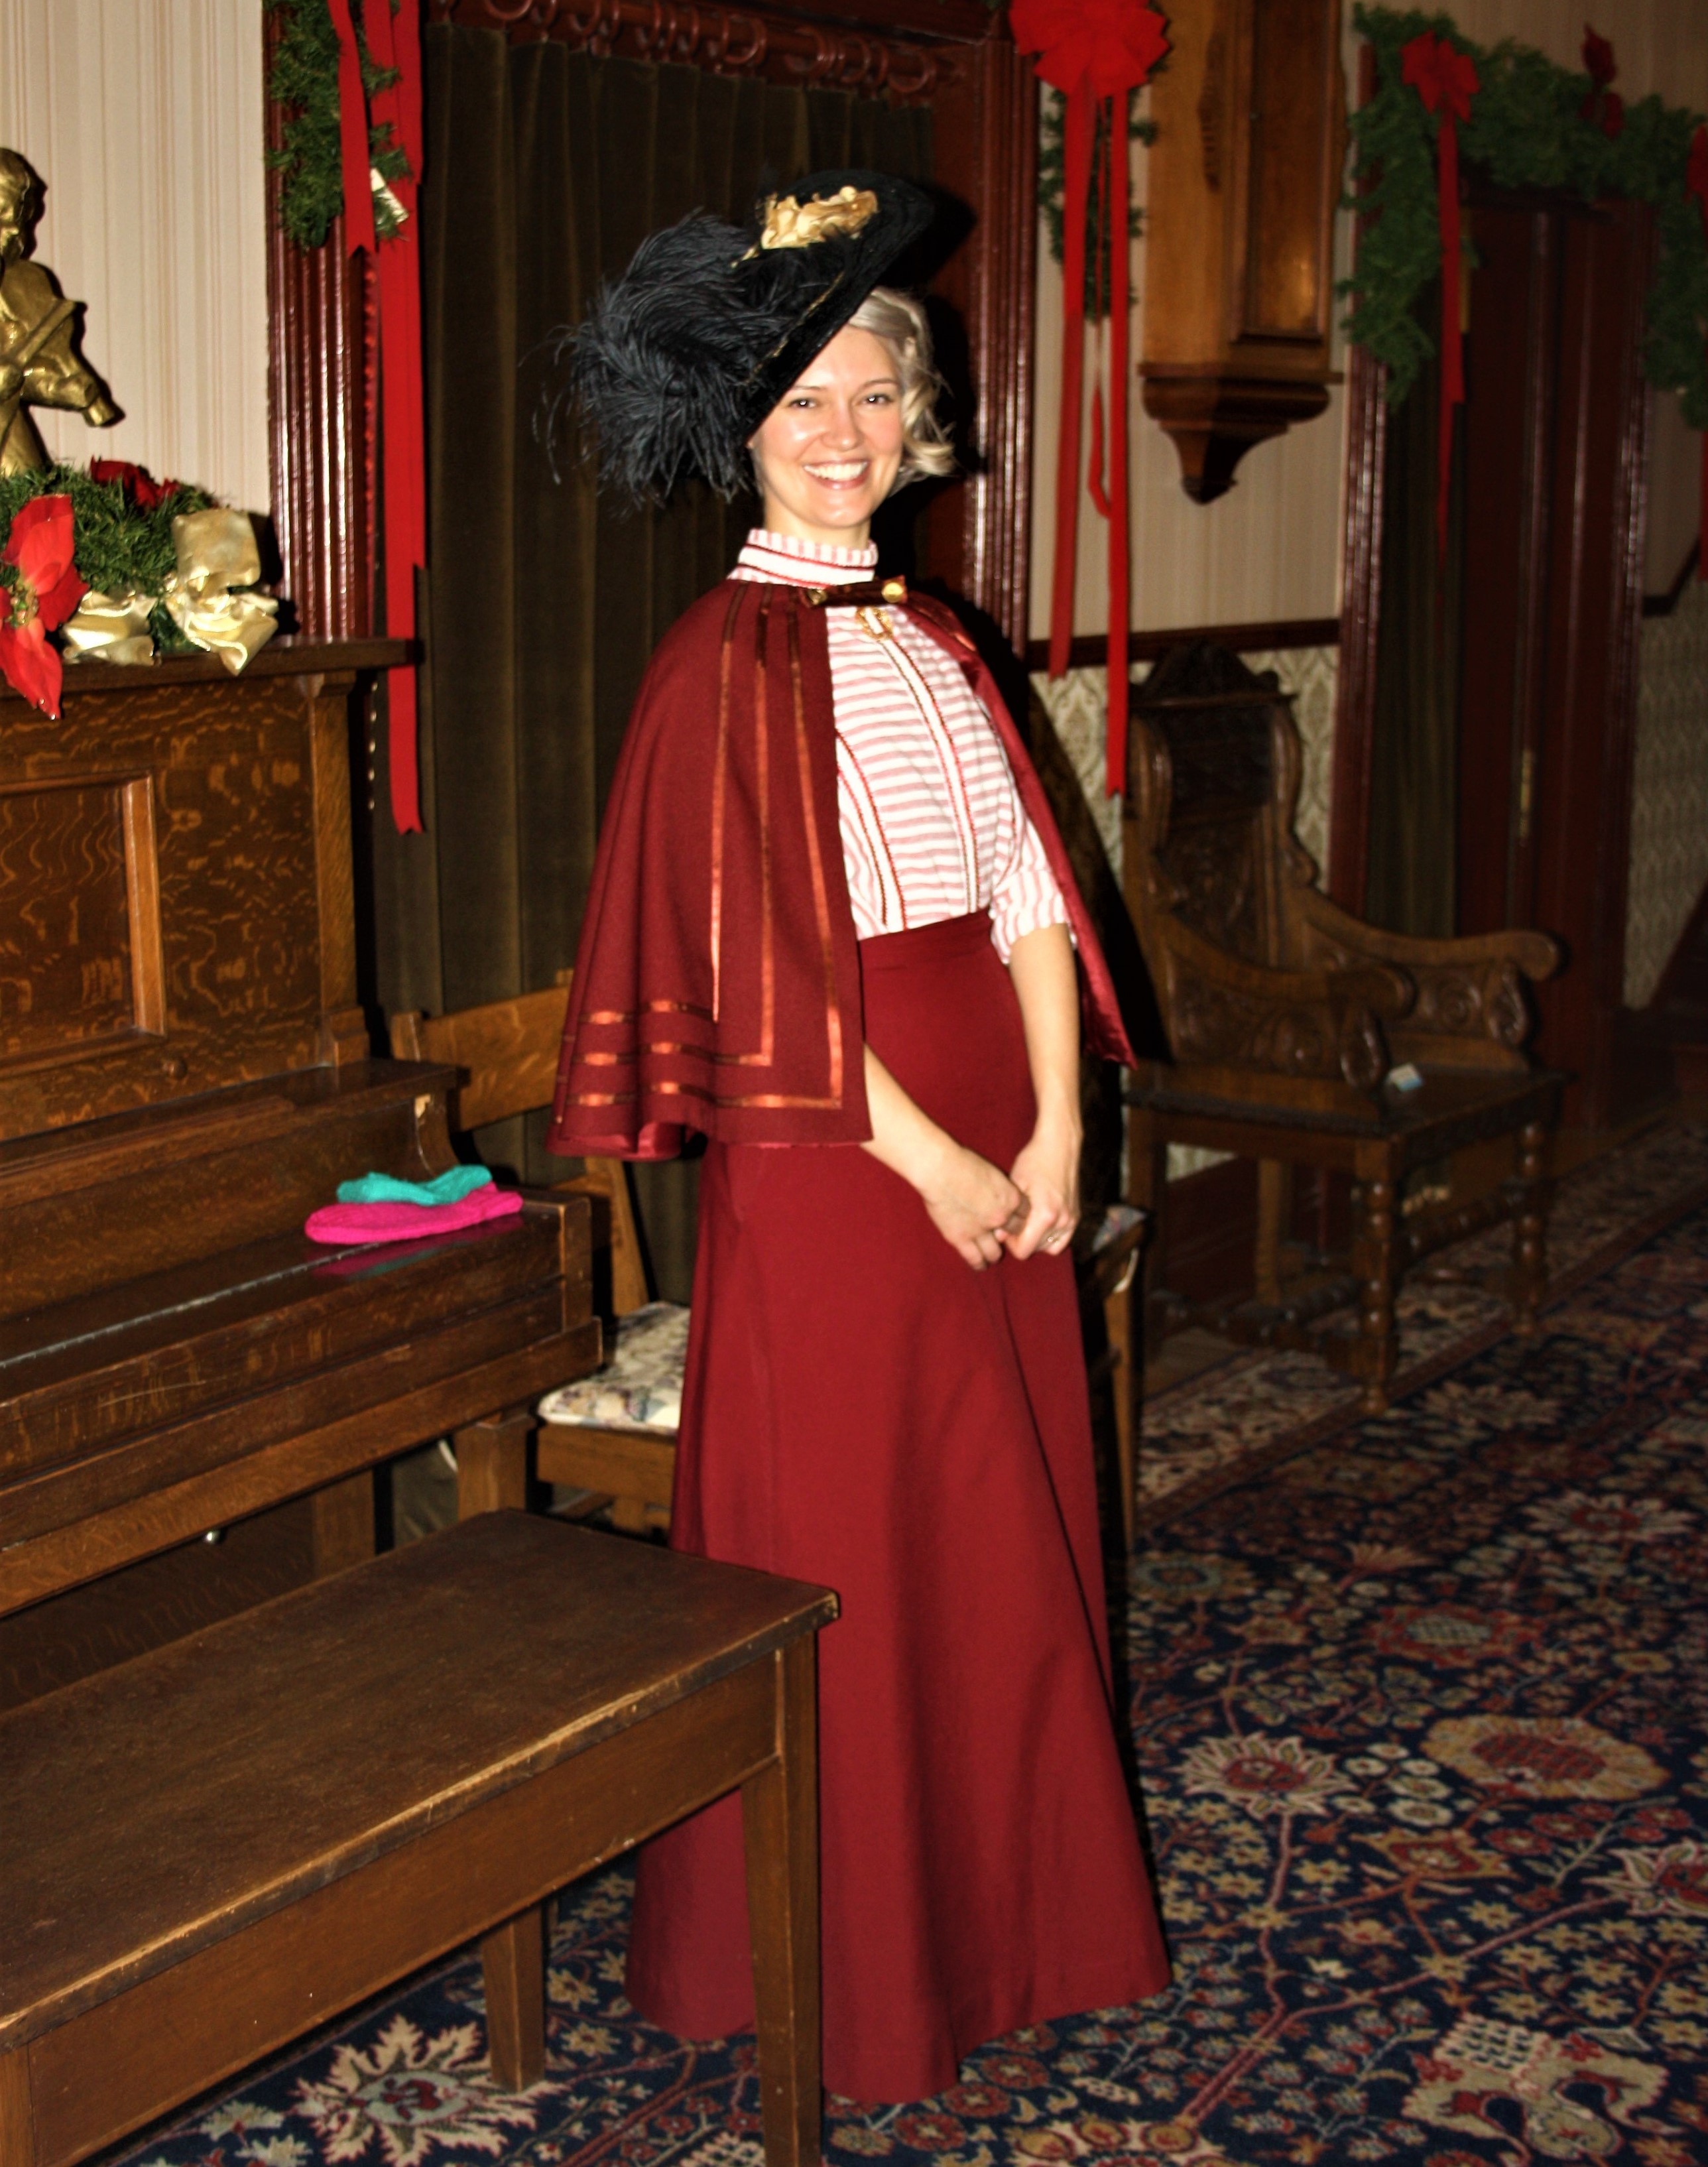 A young woman dressed in Victorian costume standing by a piano in the main hall of the Government House SK